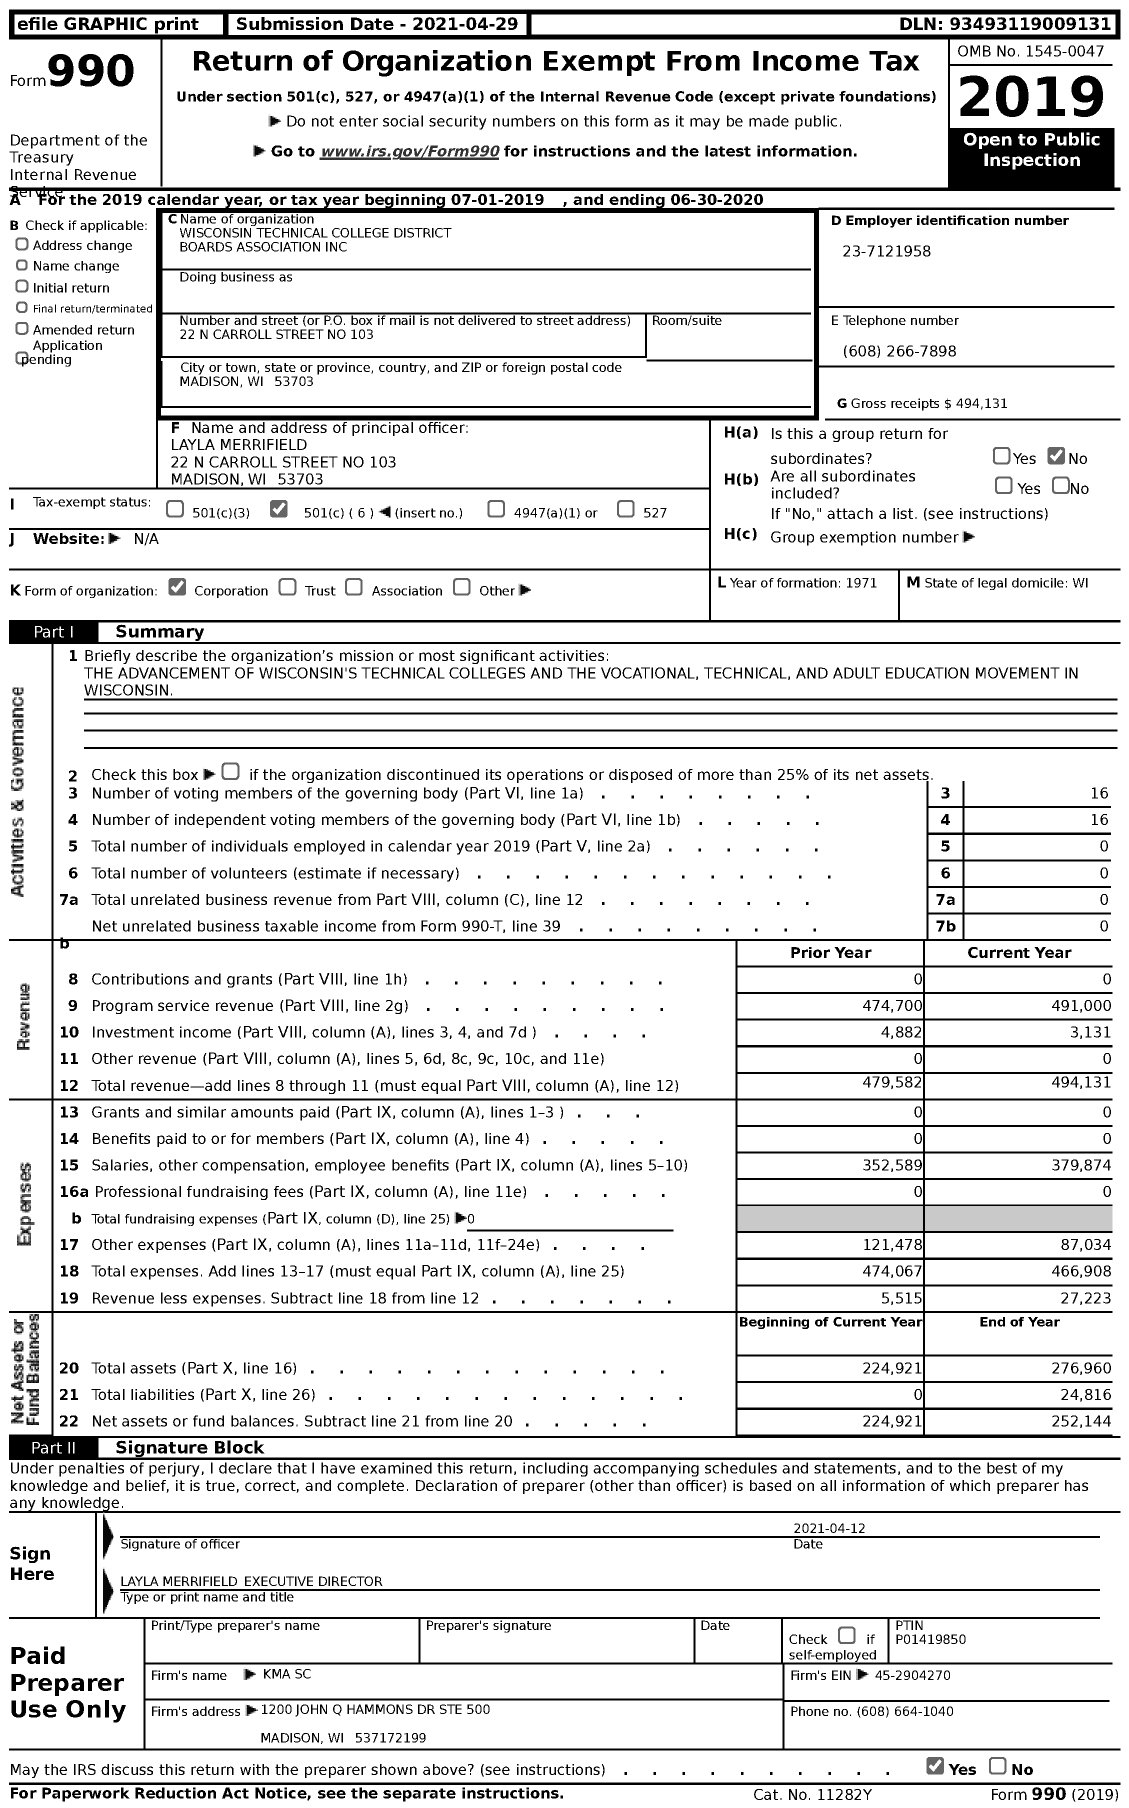 Image of first page of 2019 Form 990 for Wisconsin Technical College District Boards Association